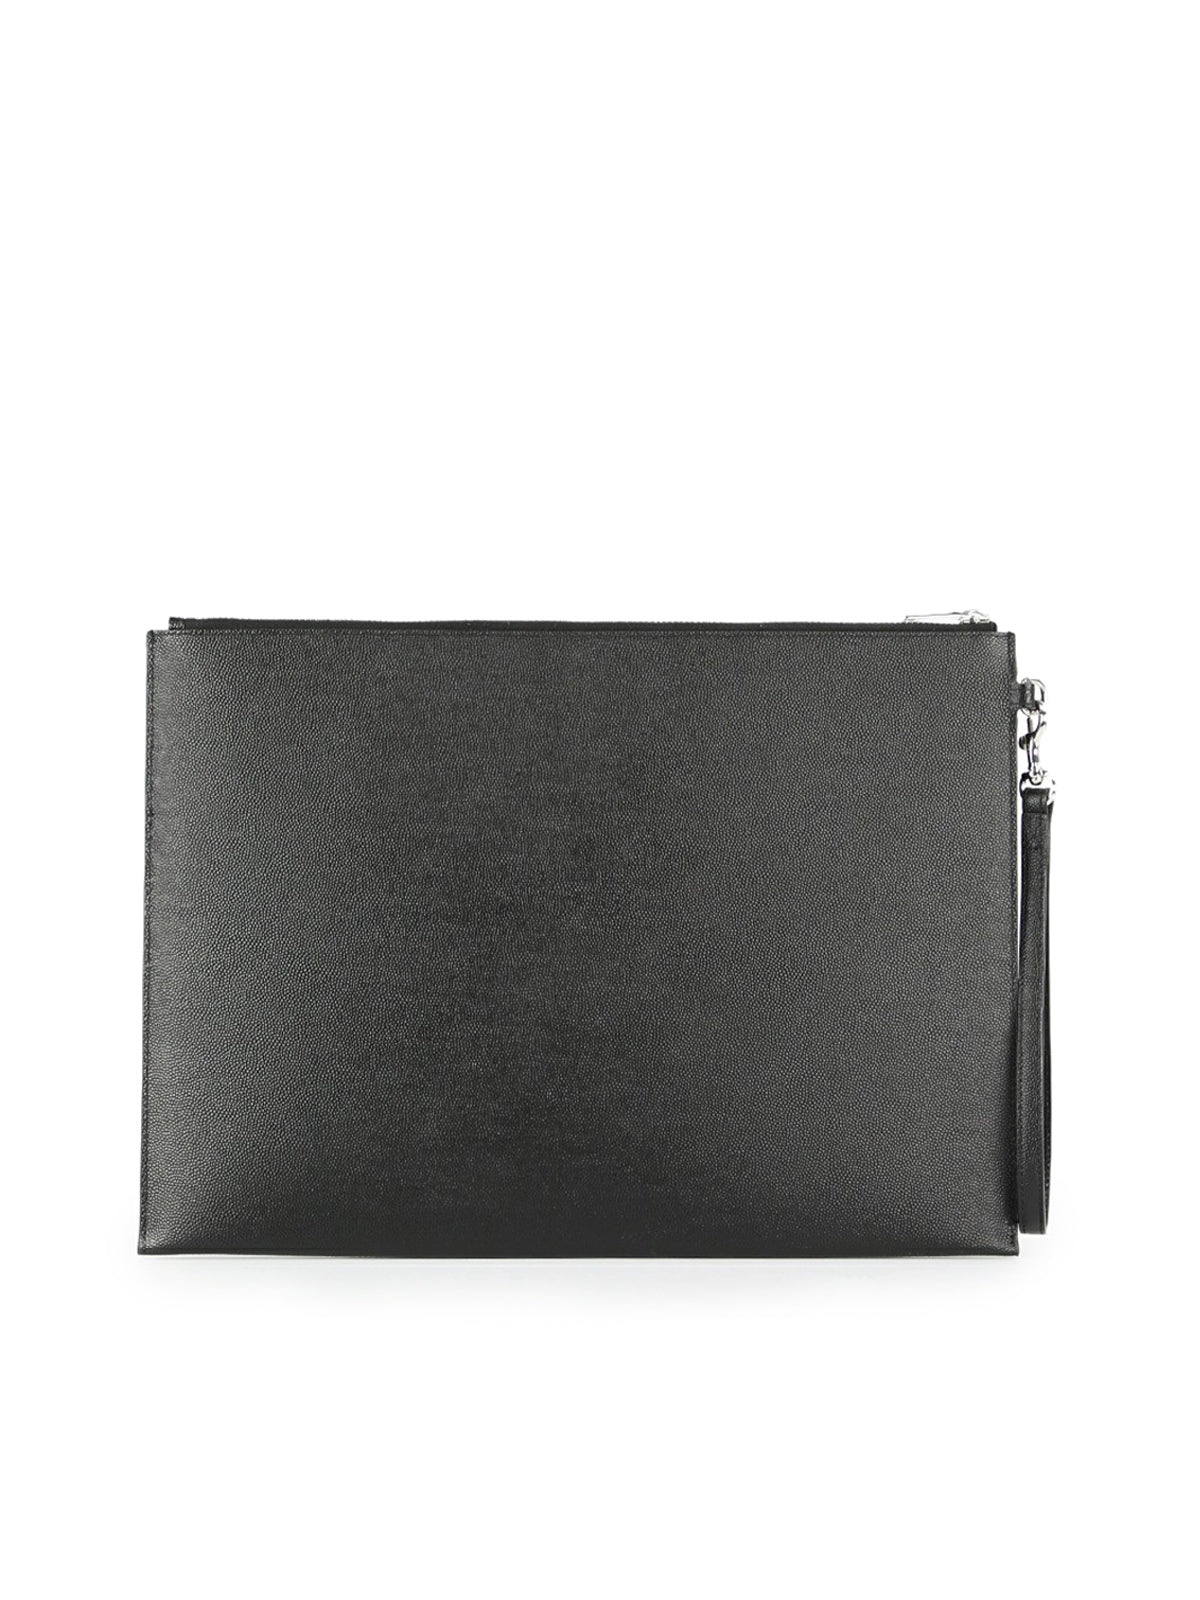 Black leather pouch